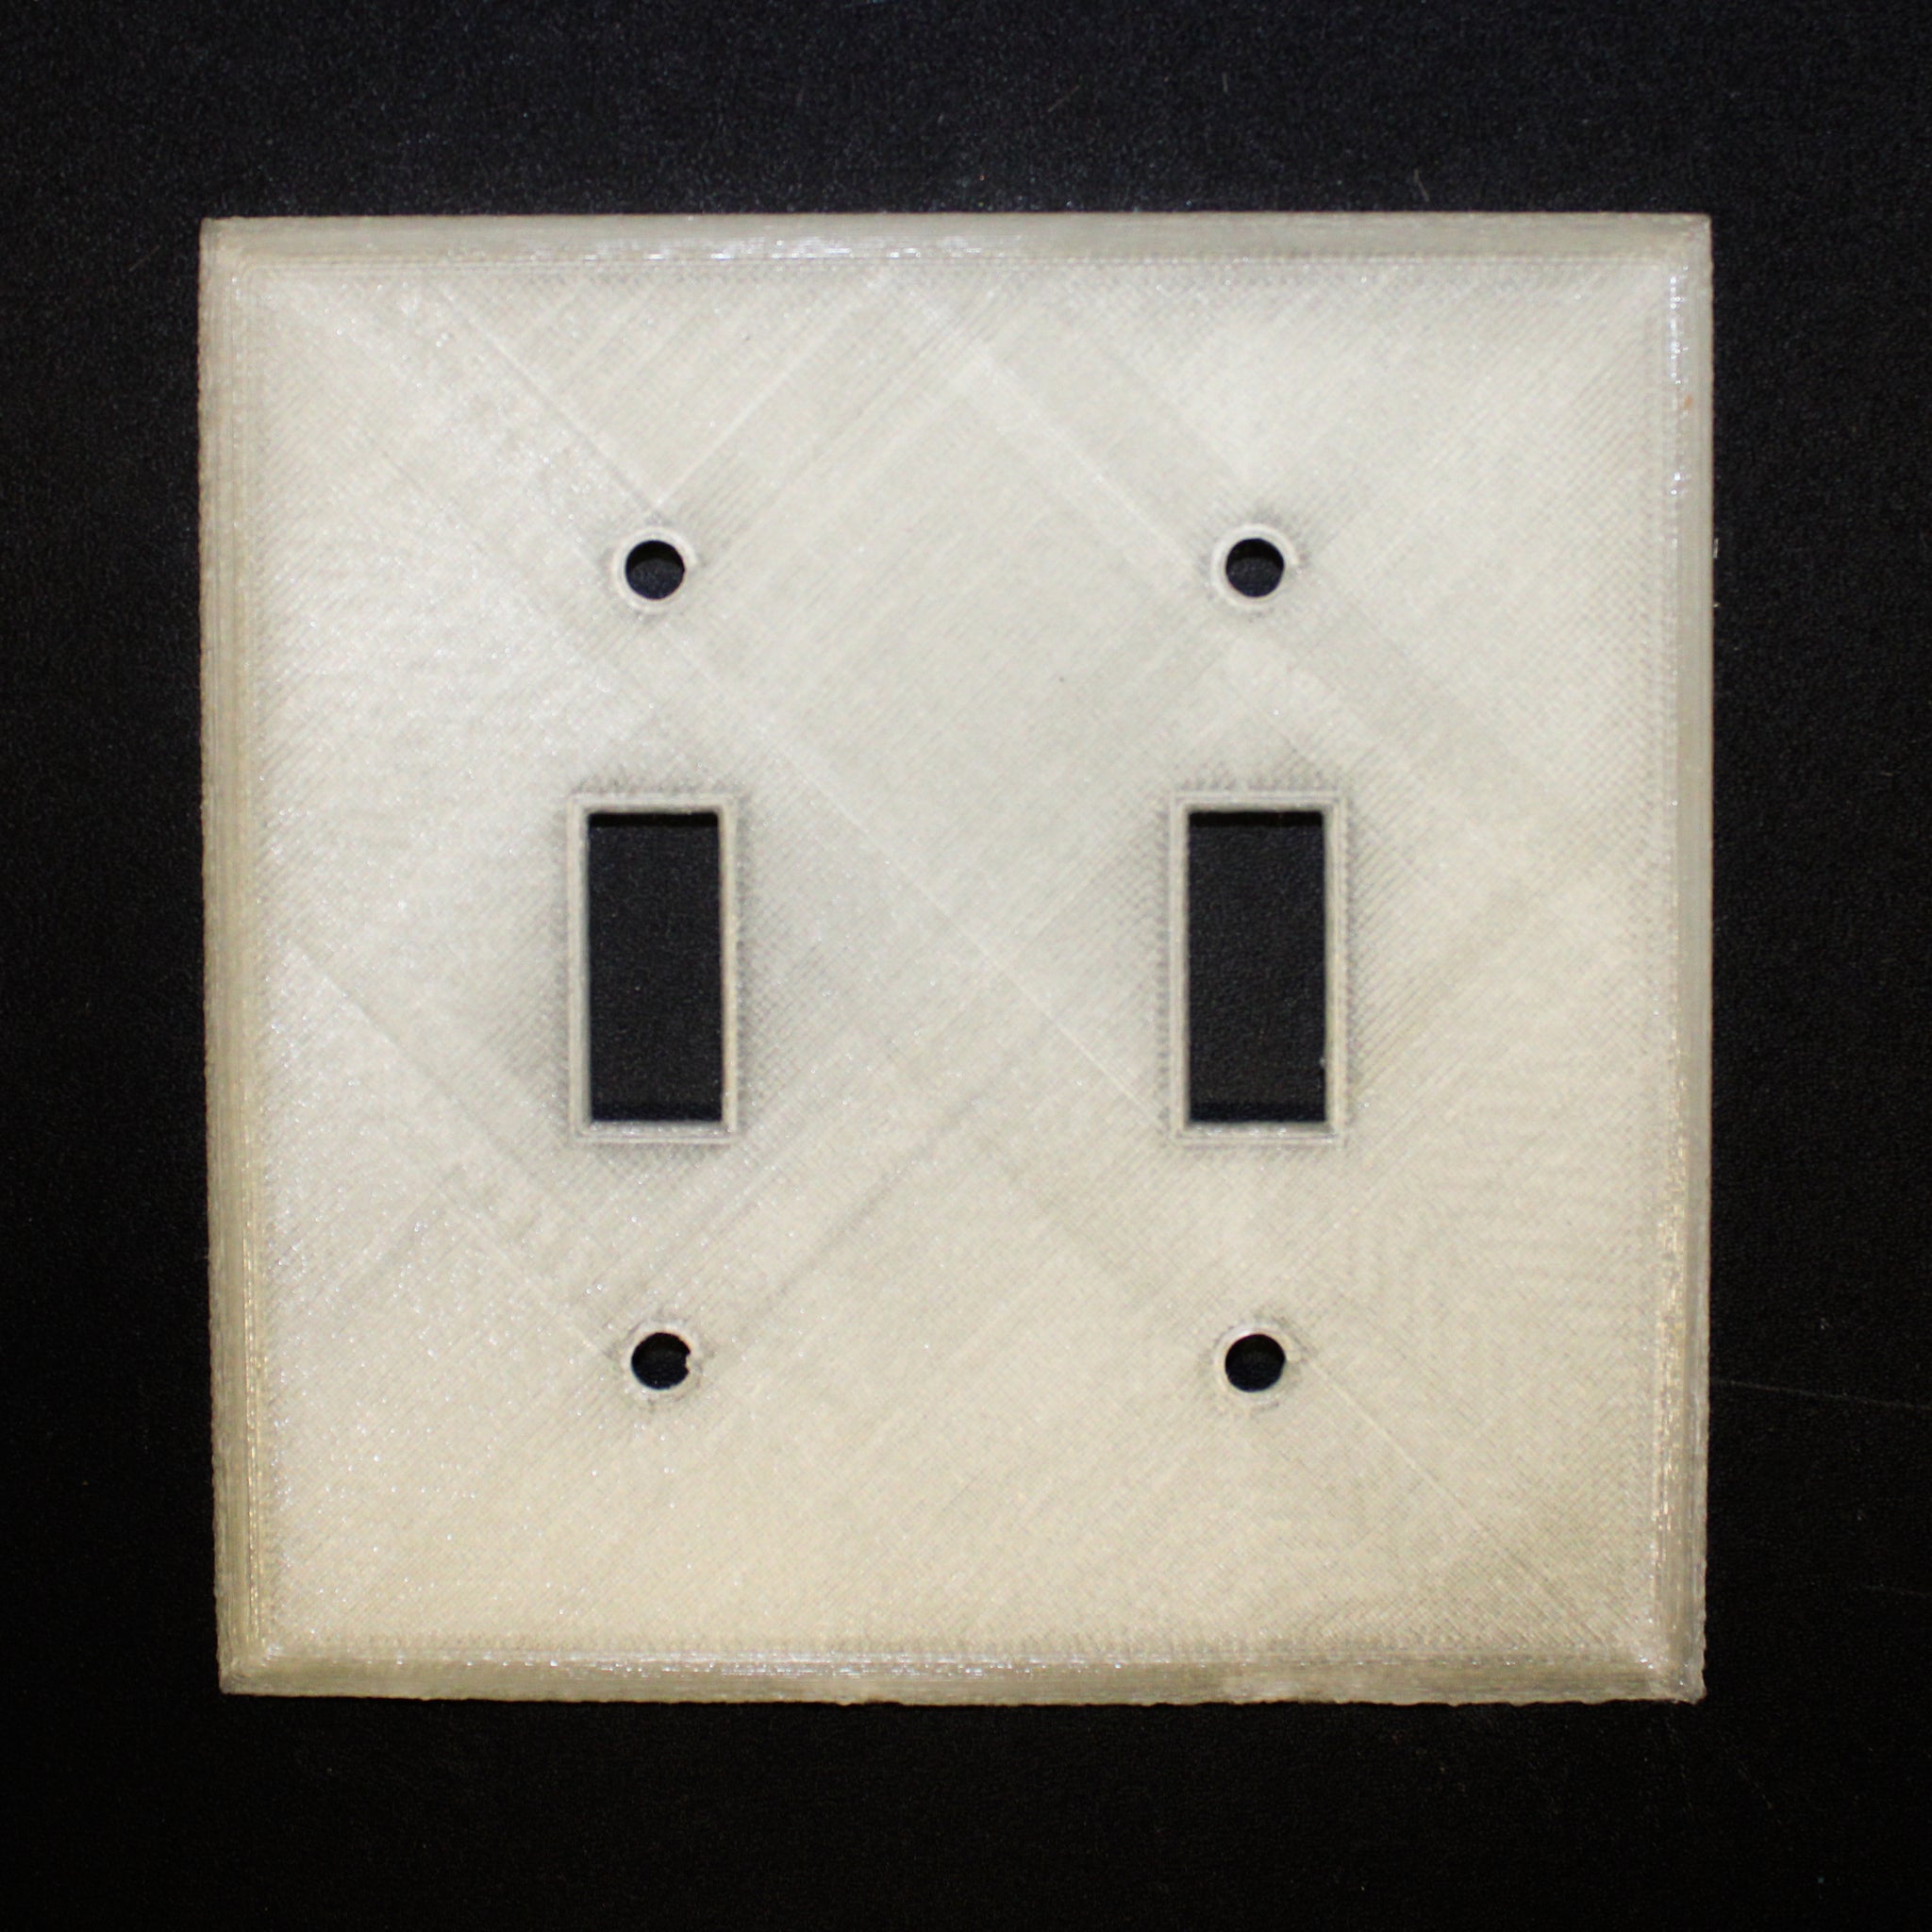 Glow in the dark light double switch cover